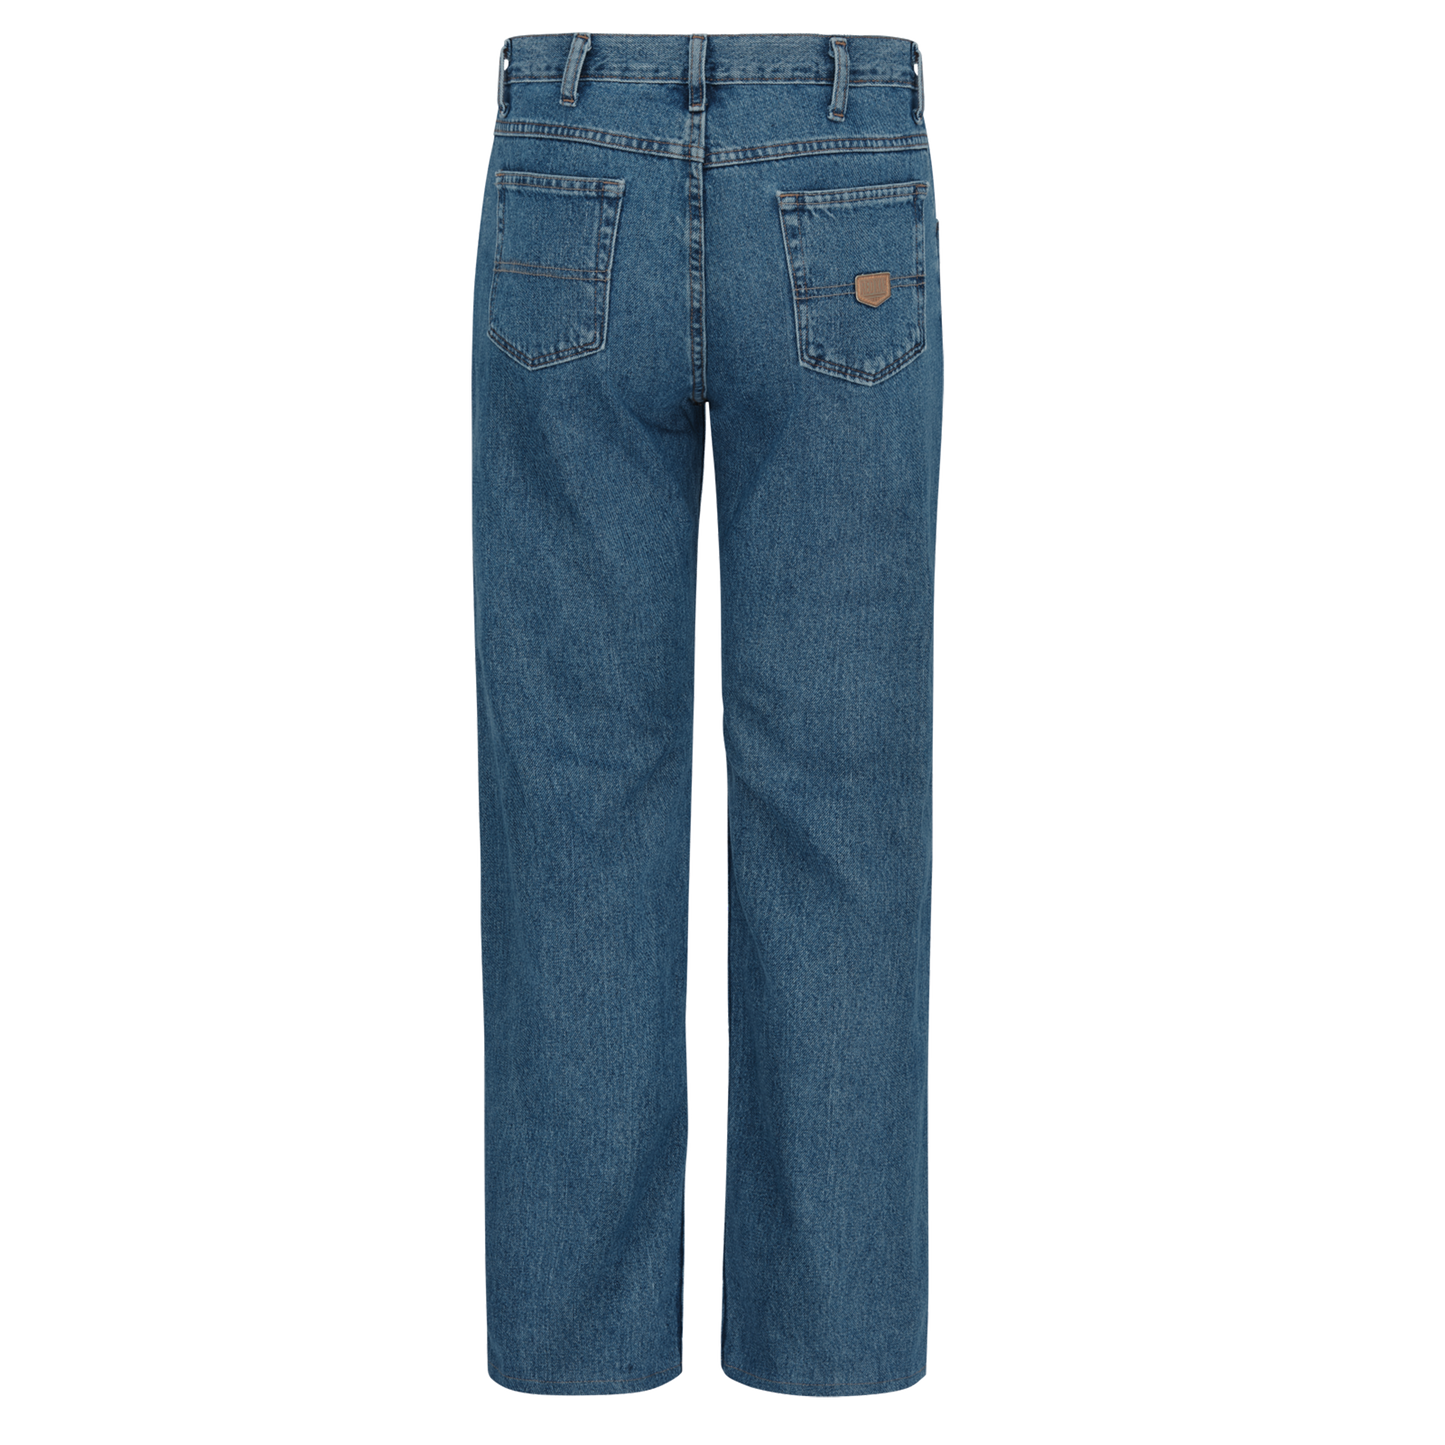 Red Kap - Men's Relaxed Fit Jean - PD60 - Stonewash